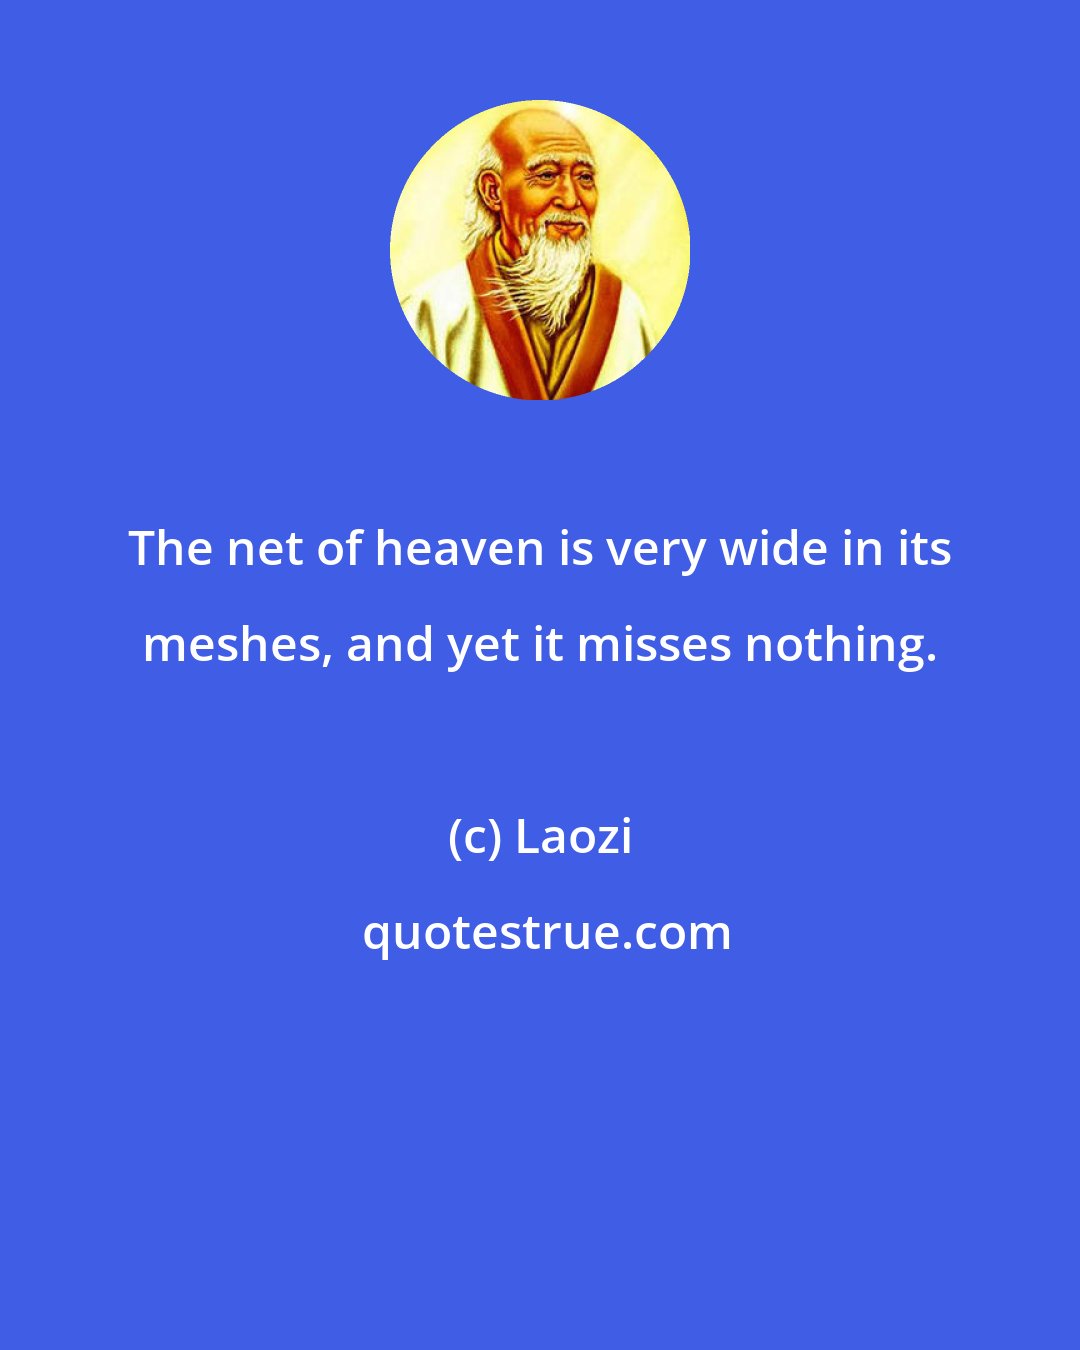 Laozi: The net of heaven is very wide in its meshes, and yet it misses nothing.